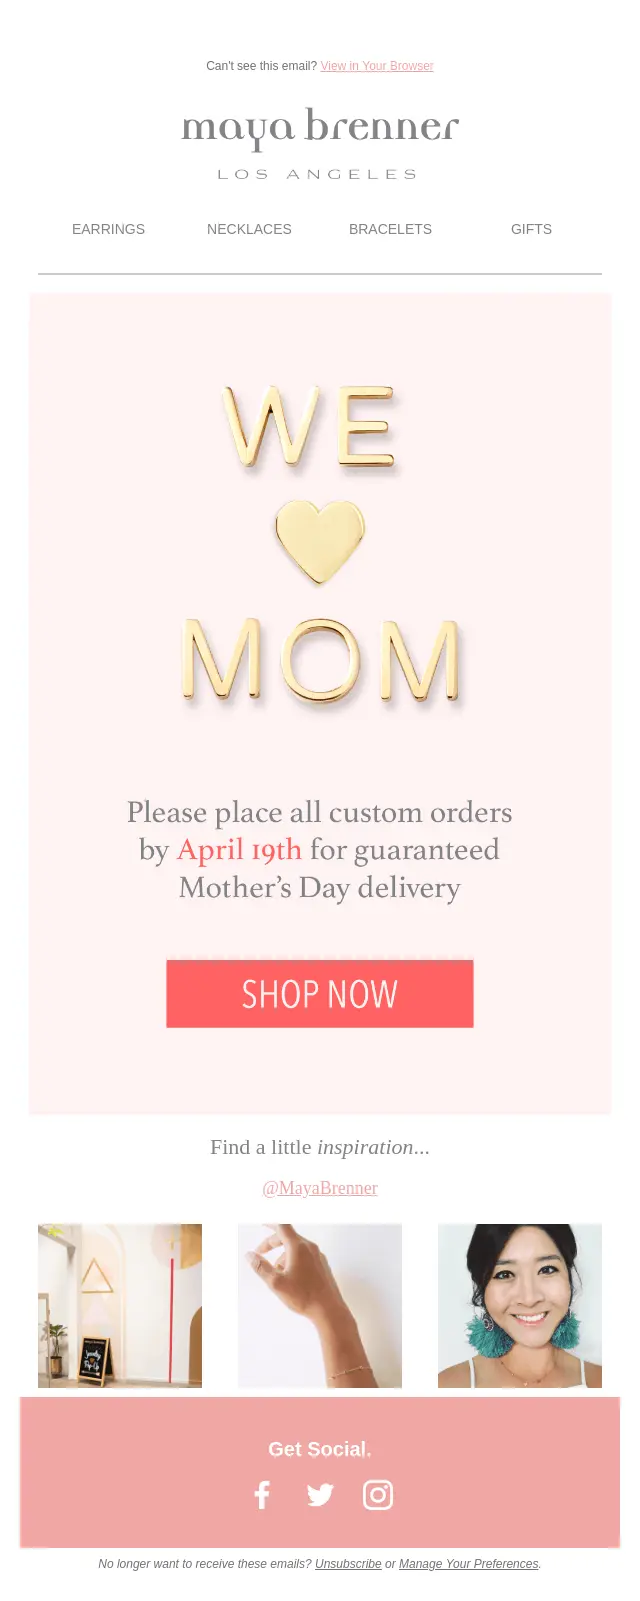 Image shows a mother’s day email campaign from Maya Brenner